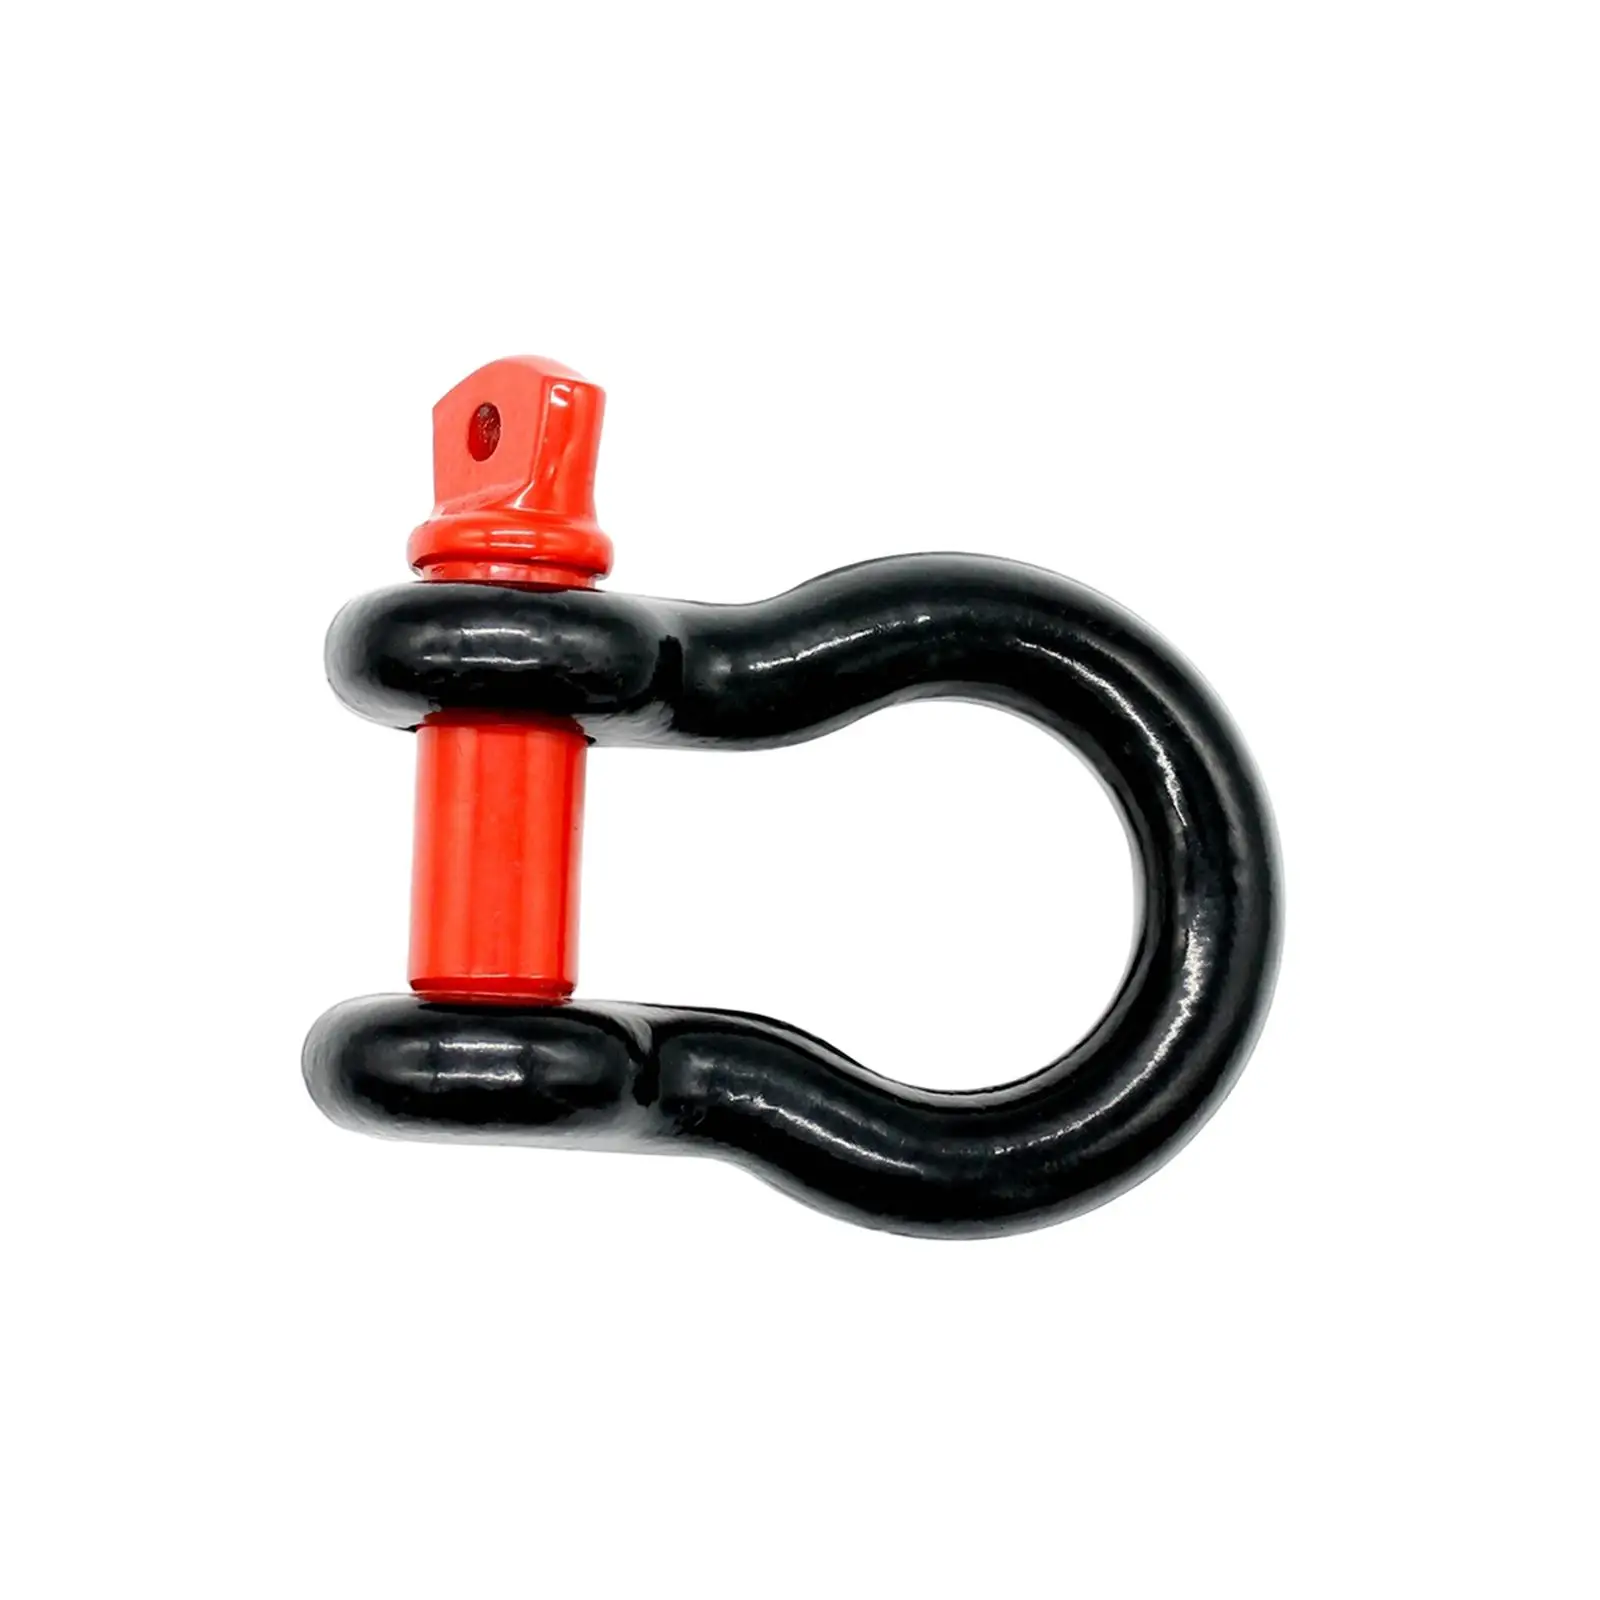 Tow Hook Sturdy Universally Tow Hook Trailer Tow Rope Shackles for Truck Vehicle Recovery Vehicle Easily Install